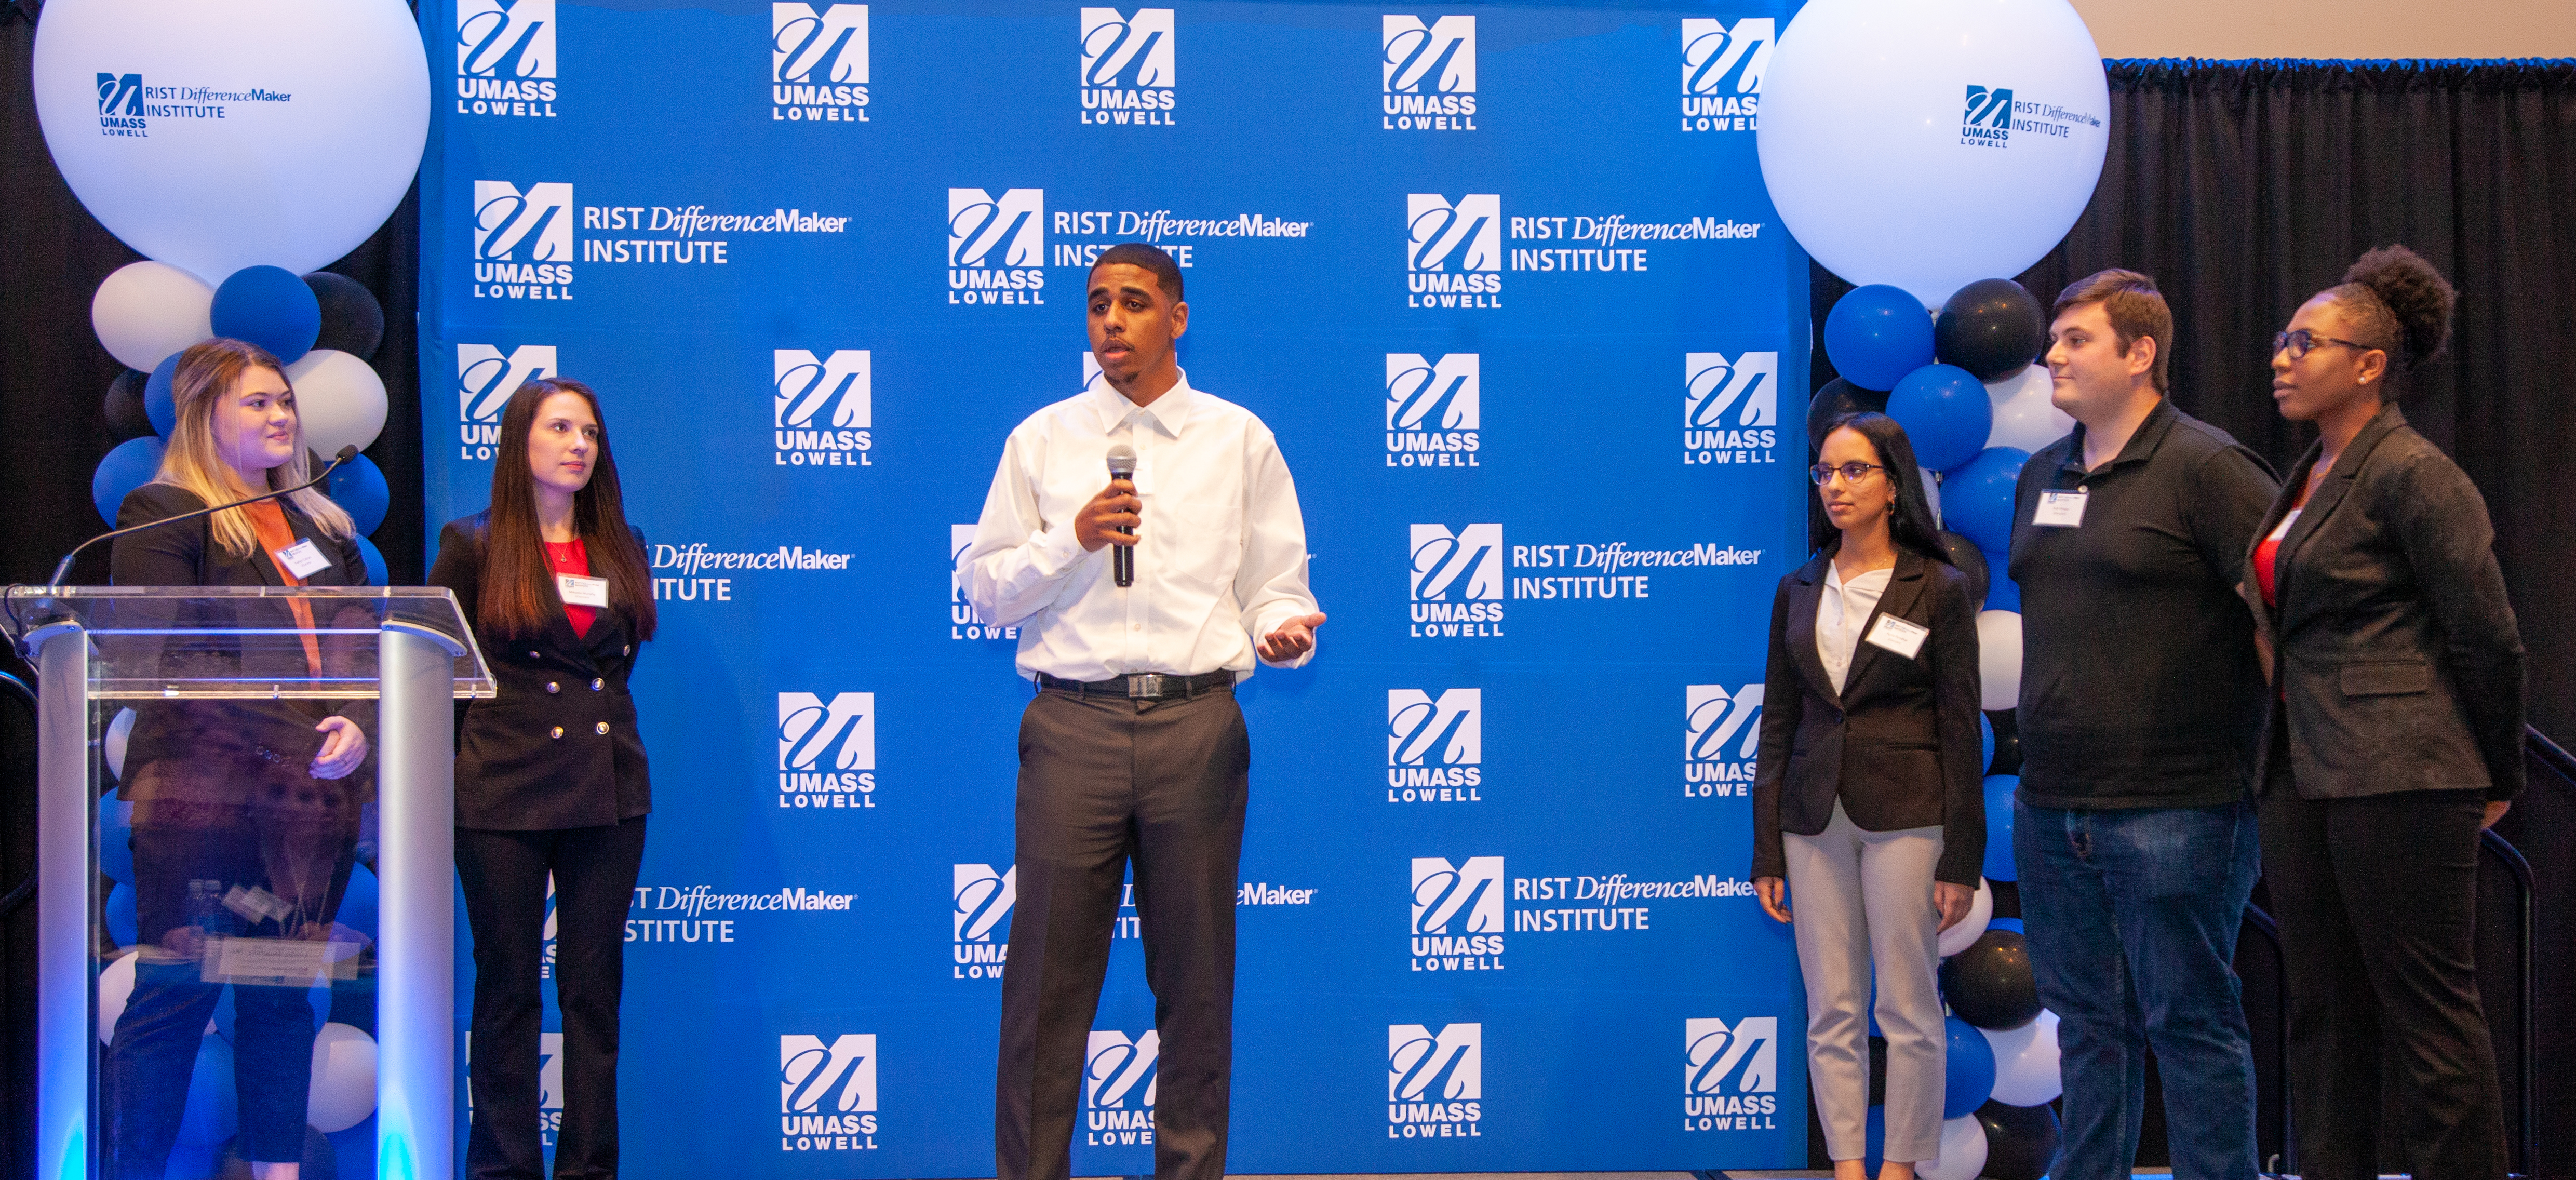 One of the members USuccess team holding a microphone and speaking in front of blue UMass Lowell backdrop while 5 others look on.